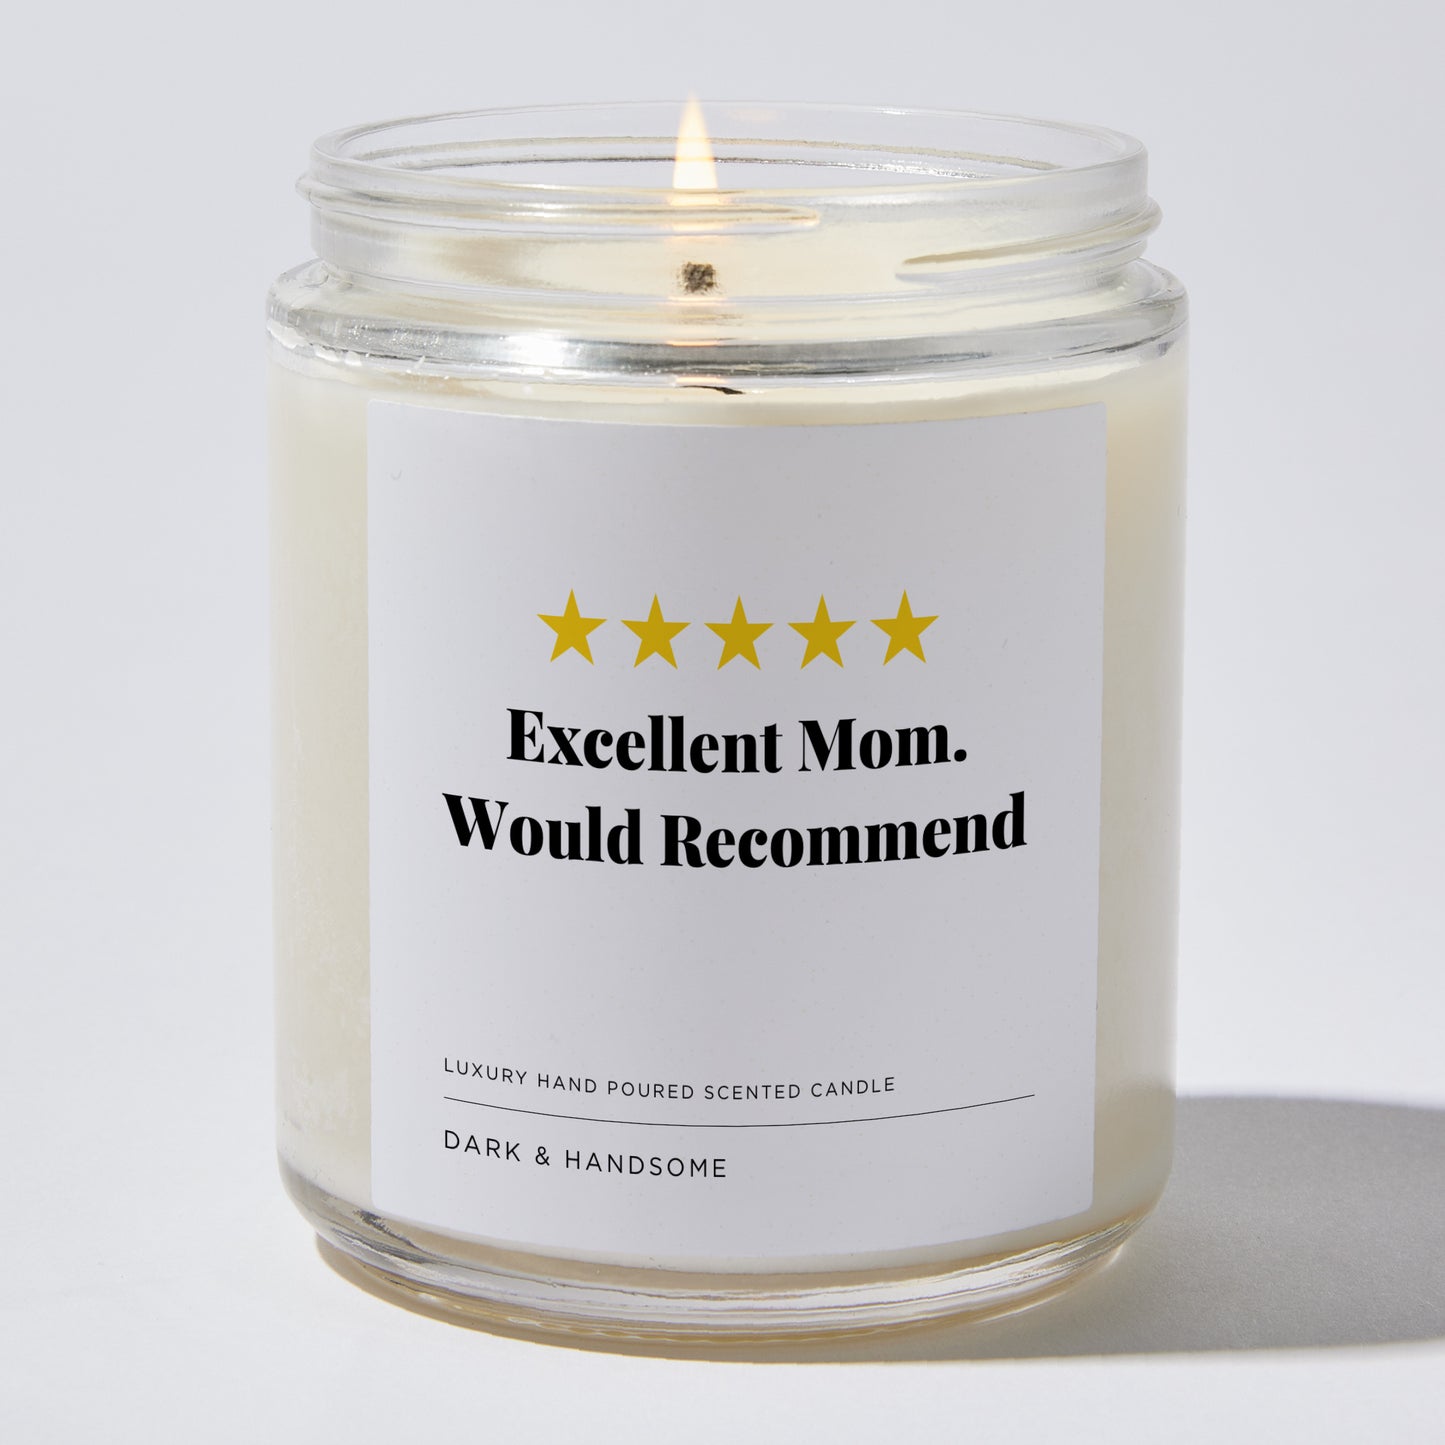 Gift for Mom - ⭐⭐⭐⭐⭐ excellent mom. would recommend - Candle